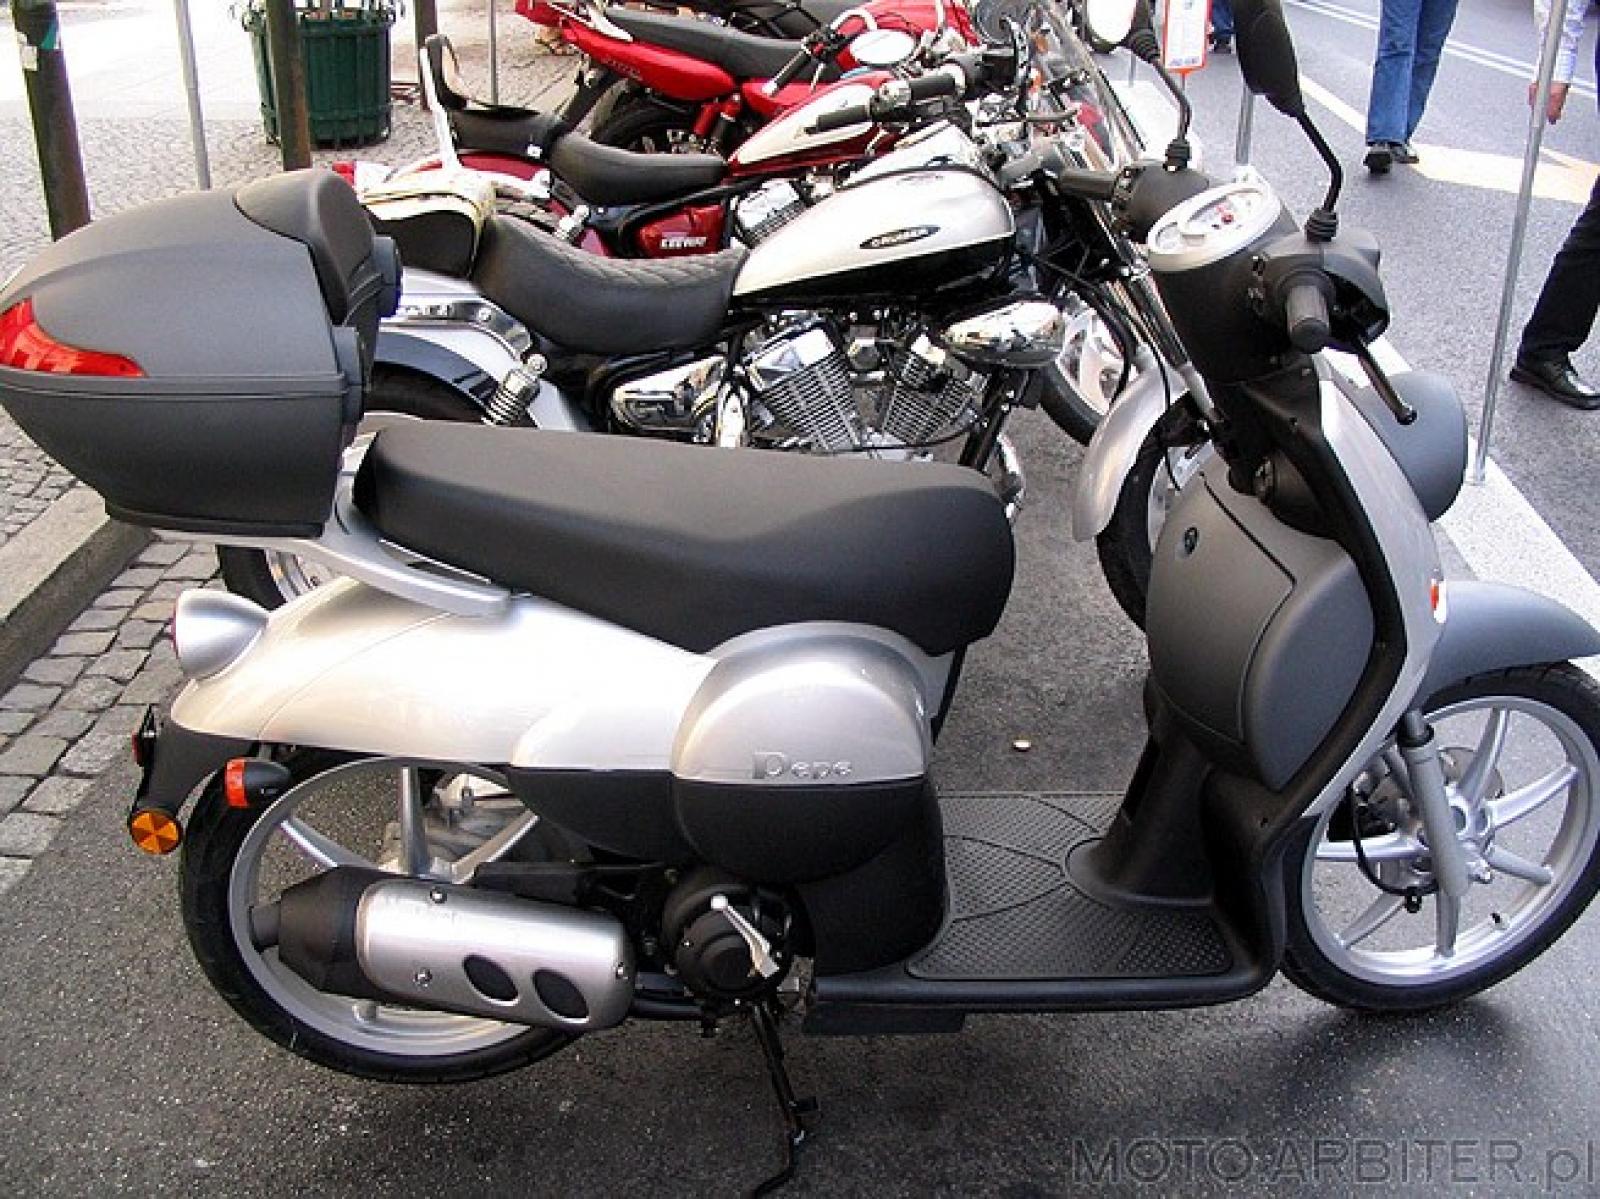 2009 Benelli Pepe 50 LX Photos, Informations, Articles 